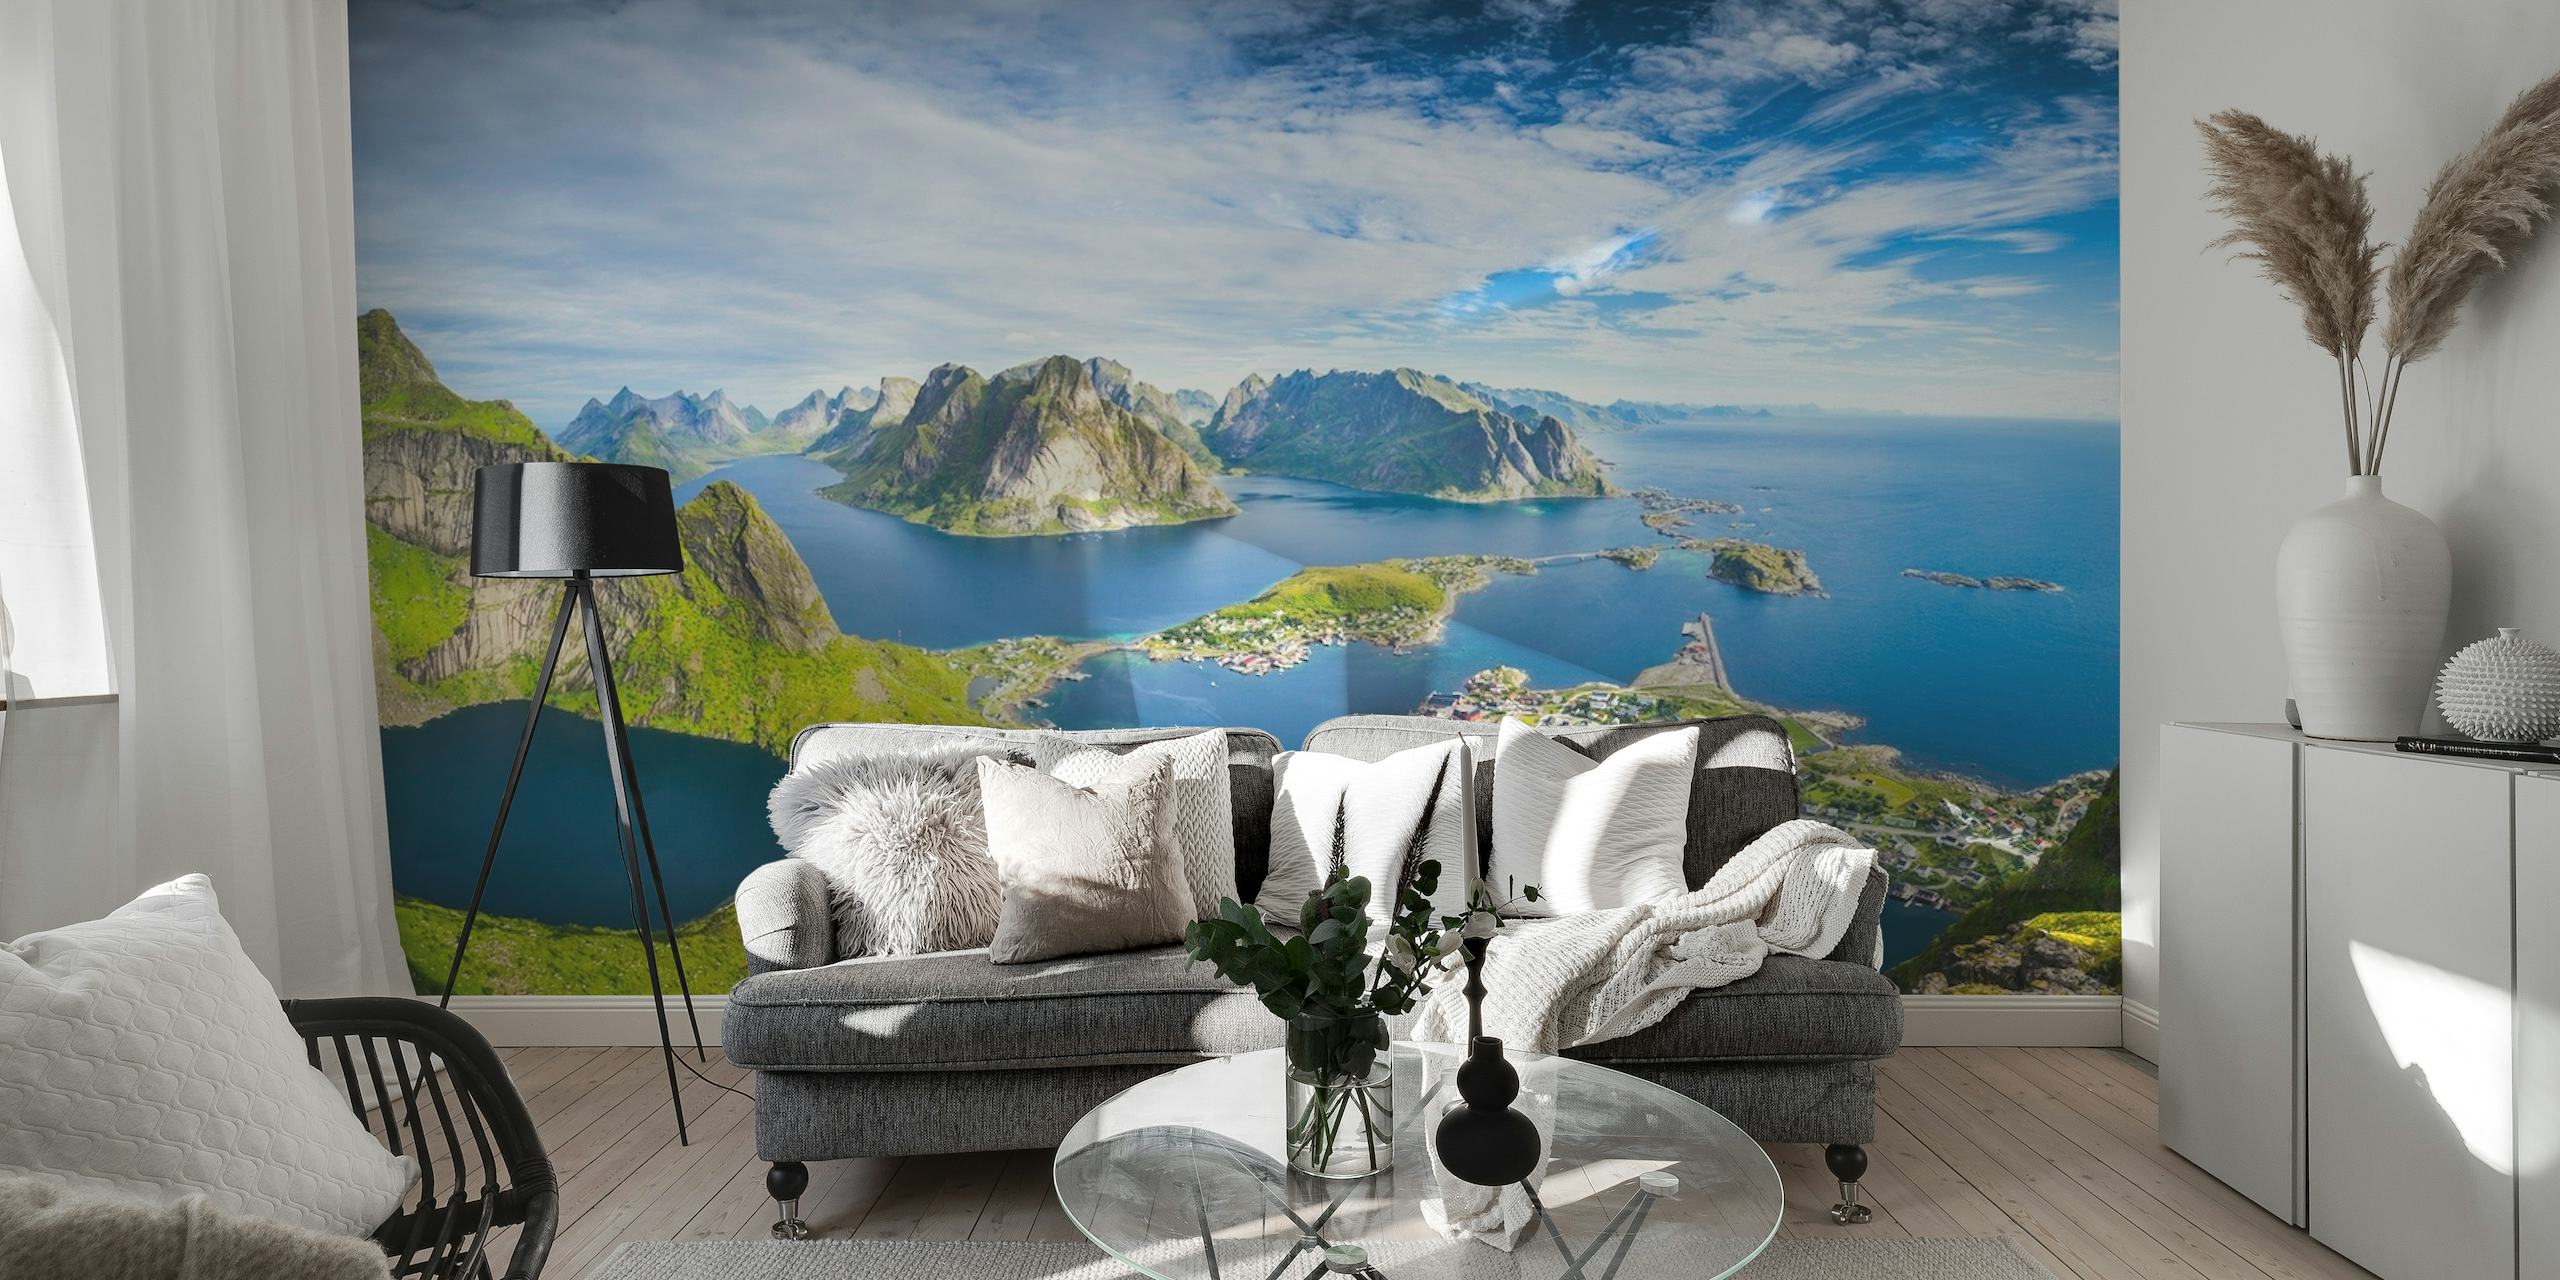 Reine Lofoten wall mural showing the scenic beauty of Norway's fjords, mountains, and coastal village